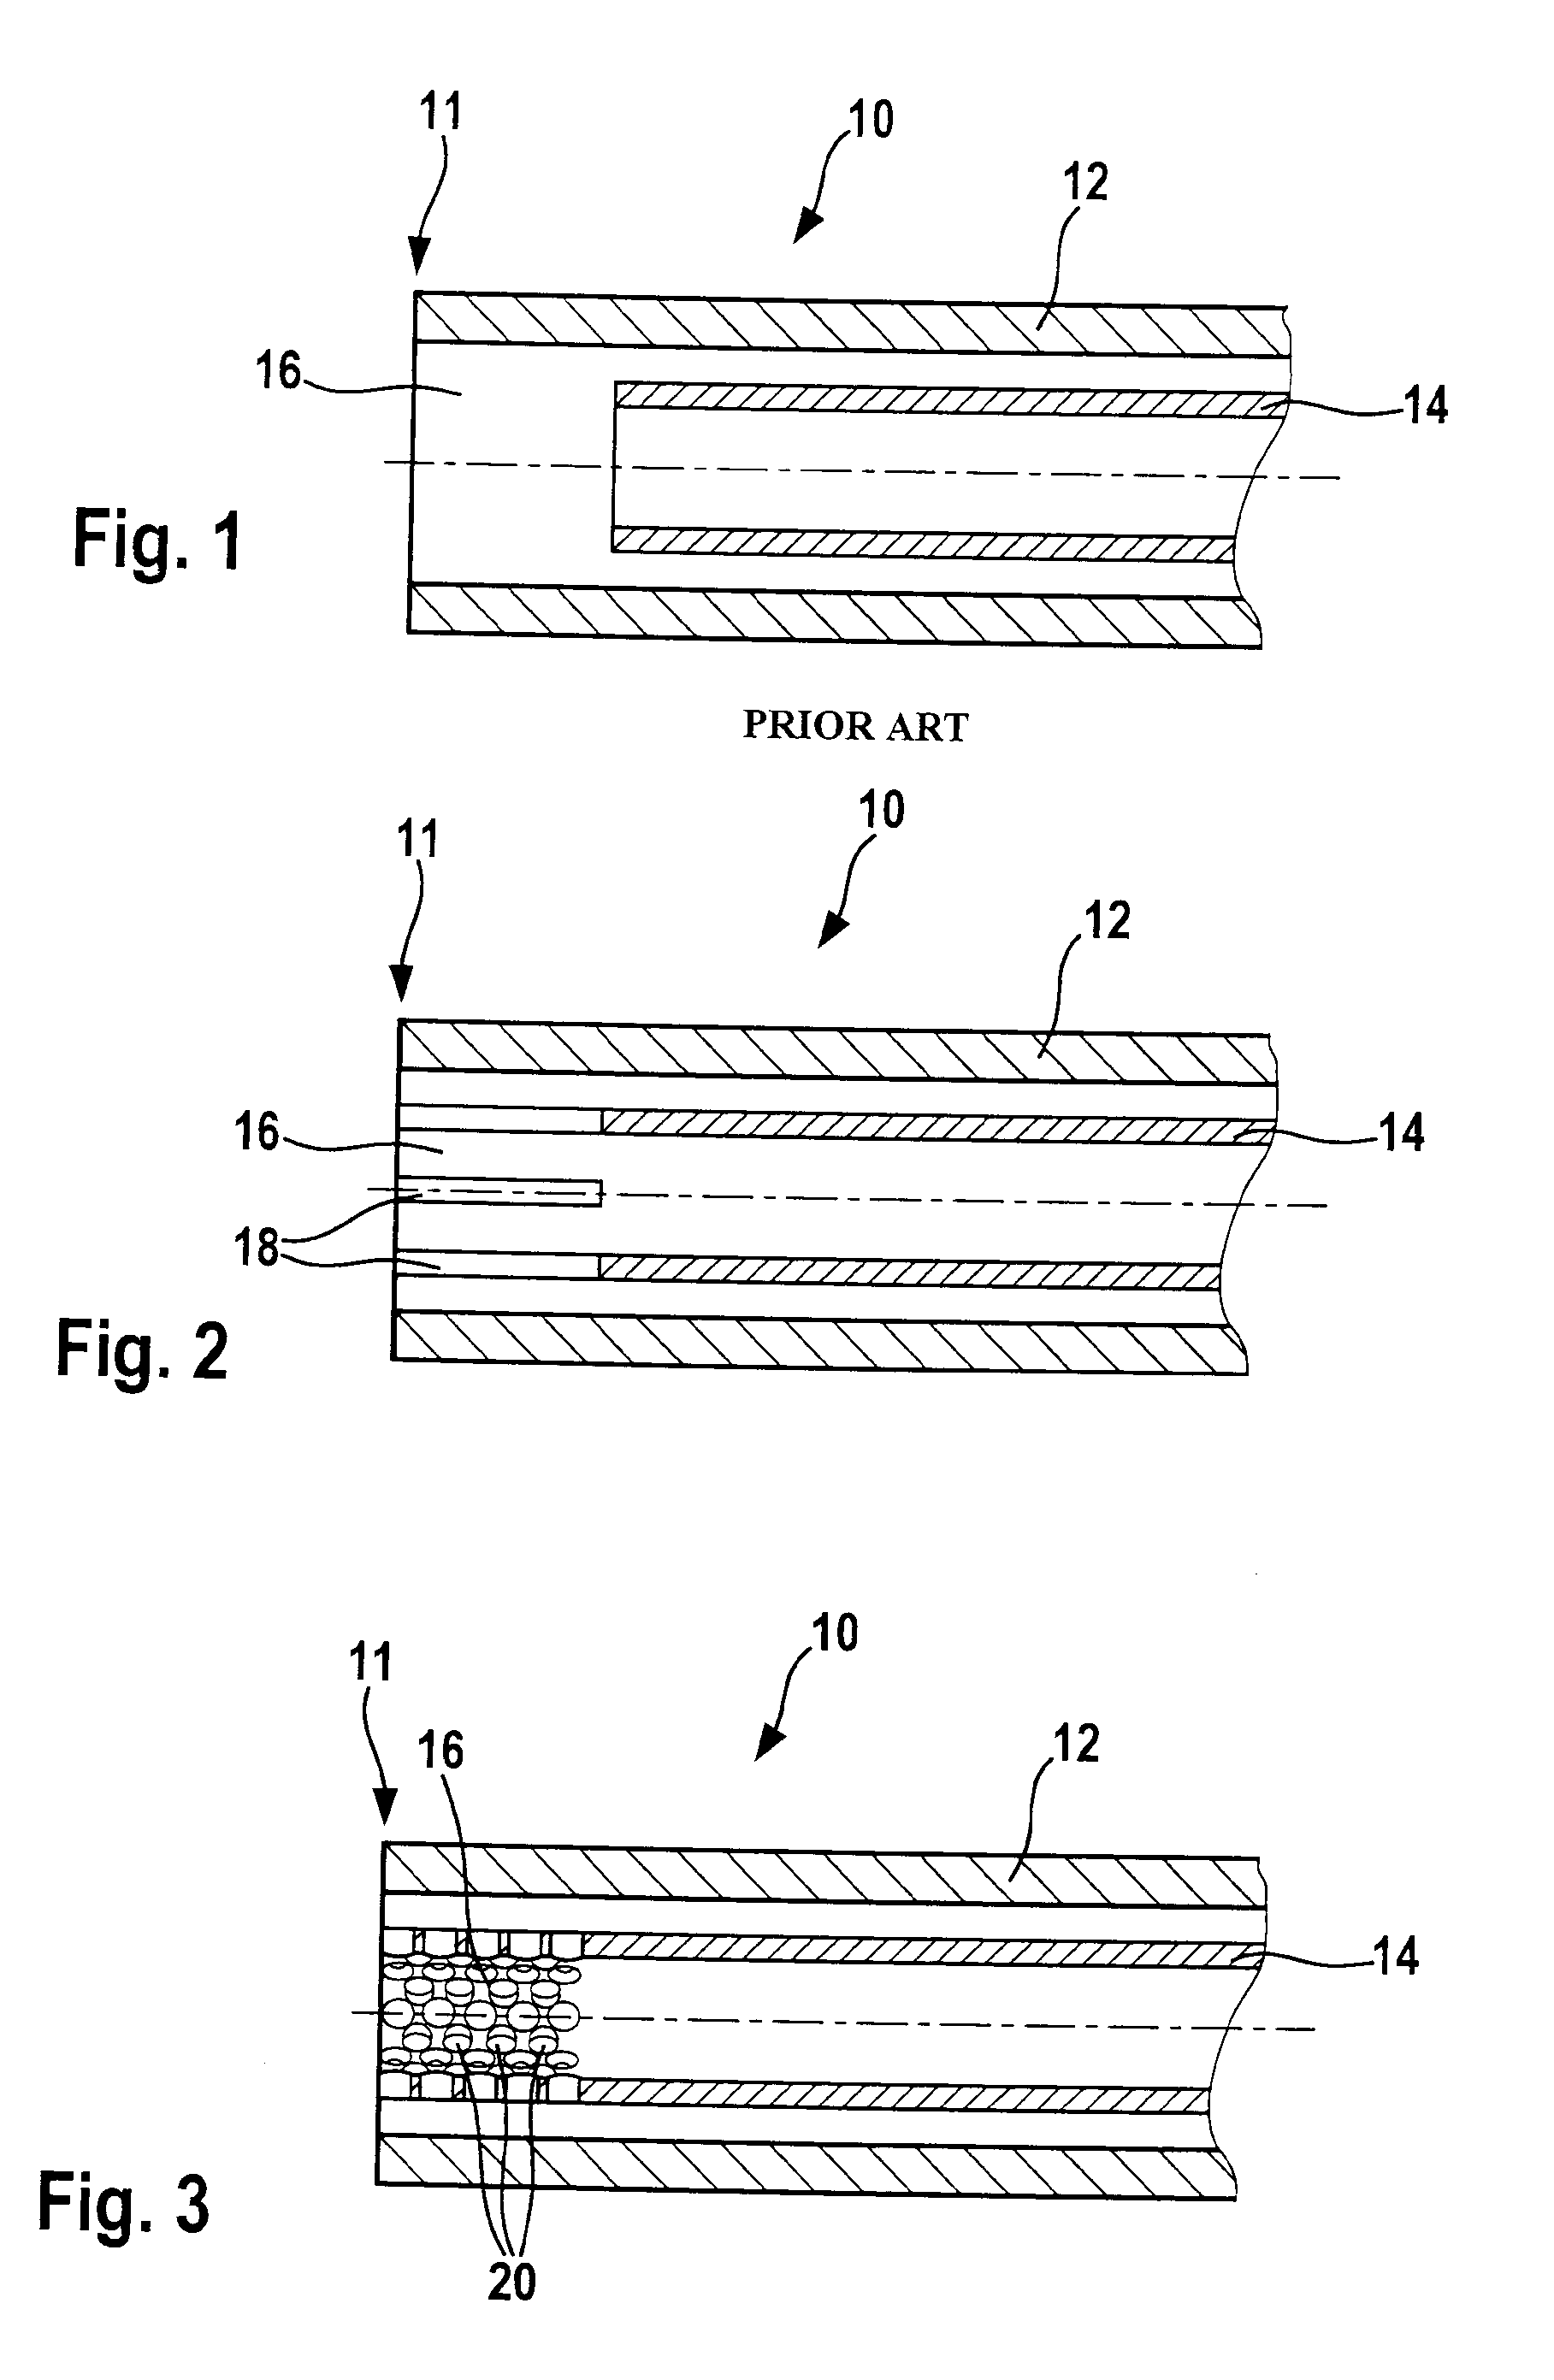 Pulverized coal injection lance